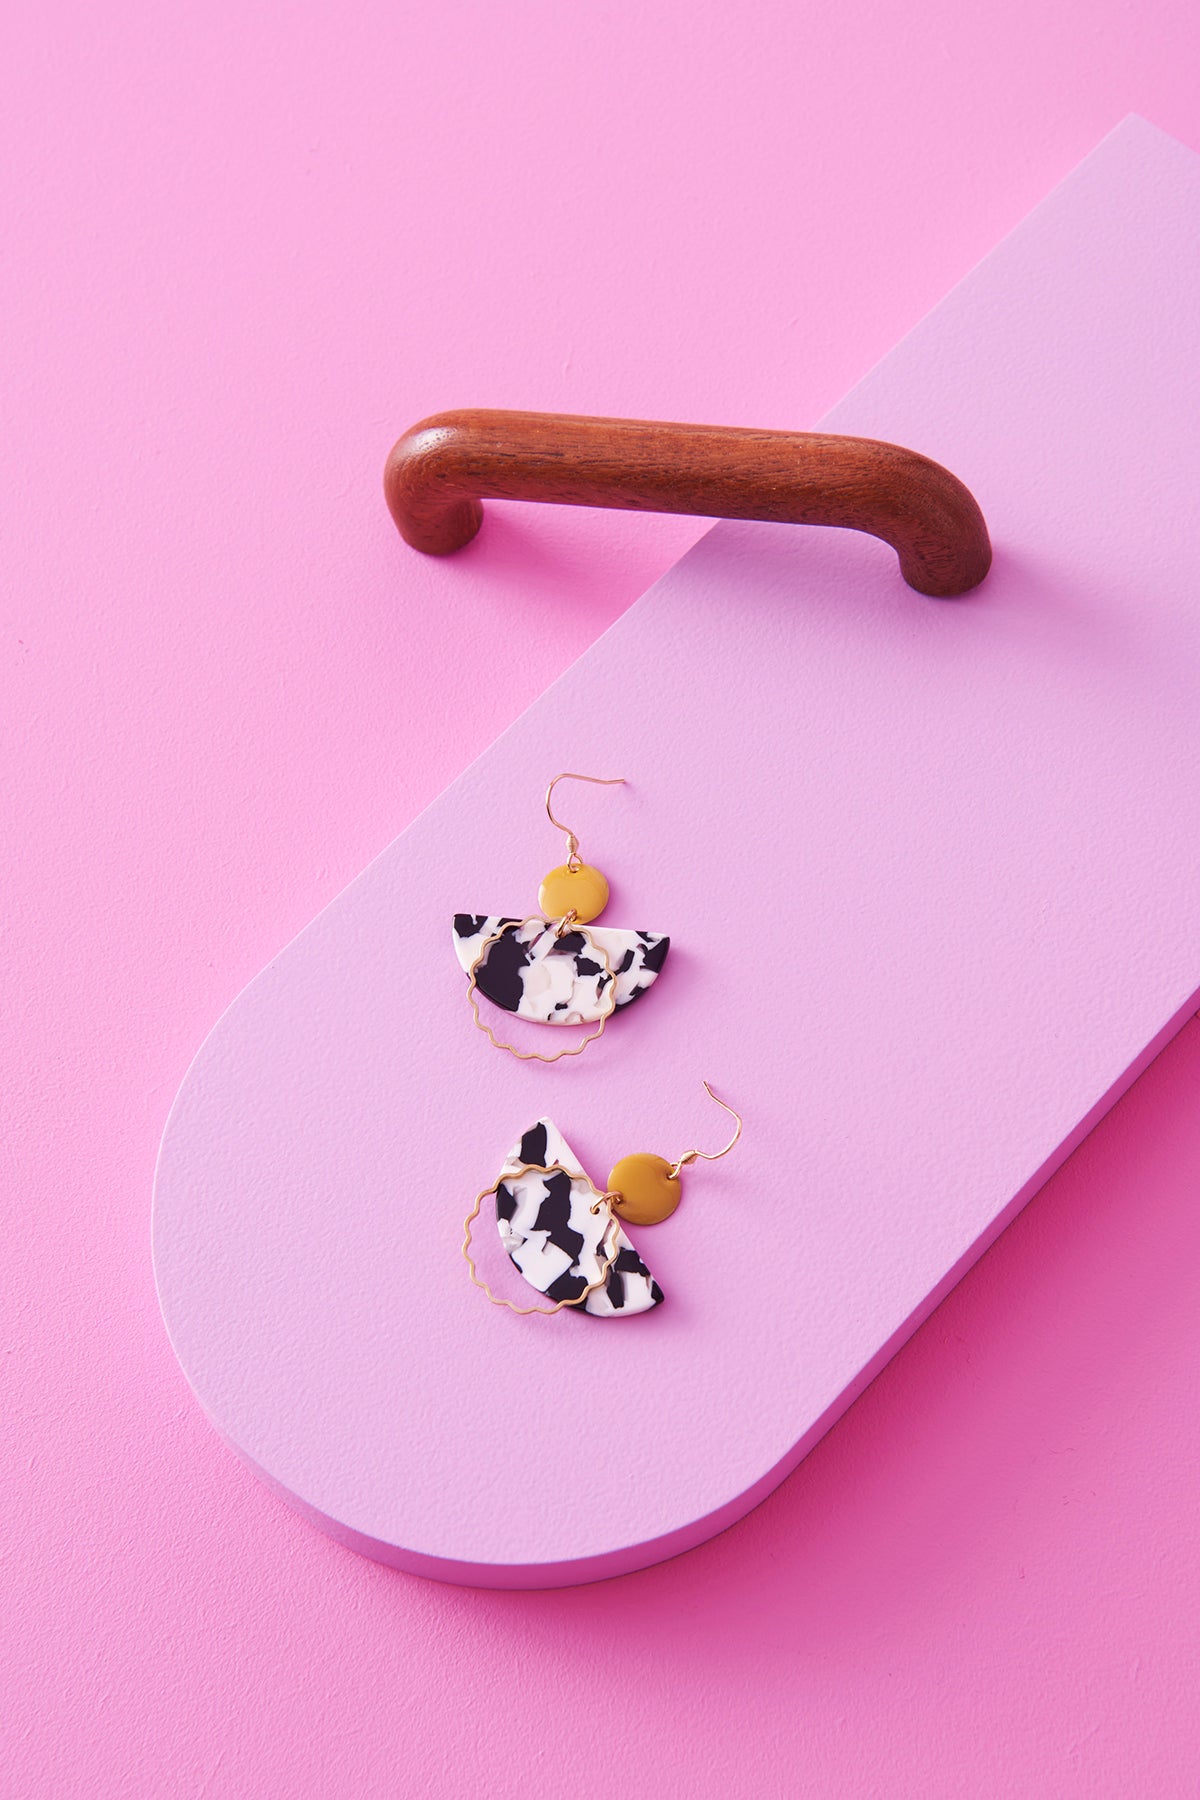 A pair of dangle earrings with a hook sit styled against a pink background next to a wooden drawer handle. The earrings feature a chartreuse enamel dot, a black and white D-shaped acrylic, and a wavy brass ring.